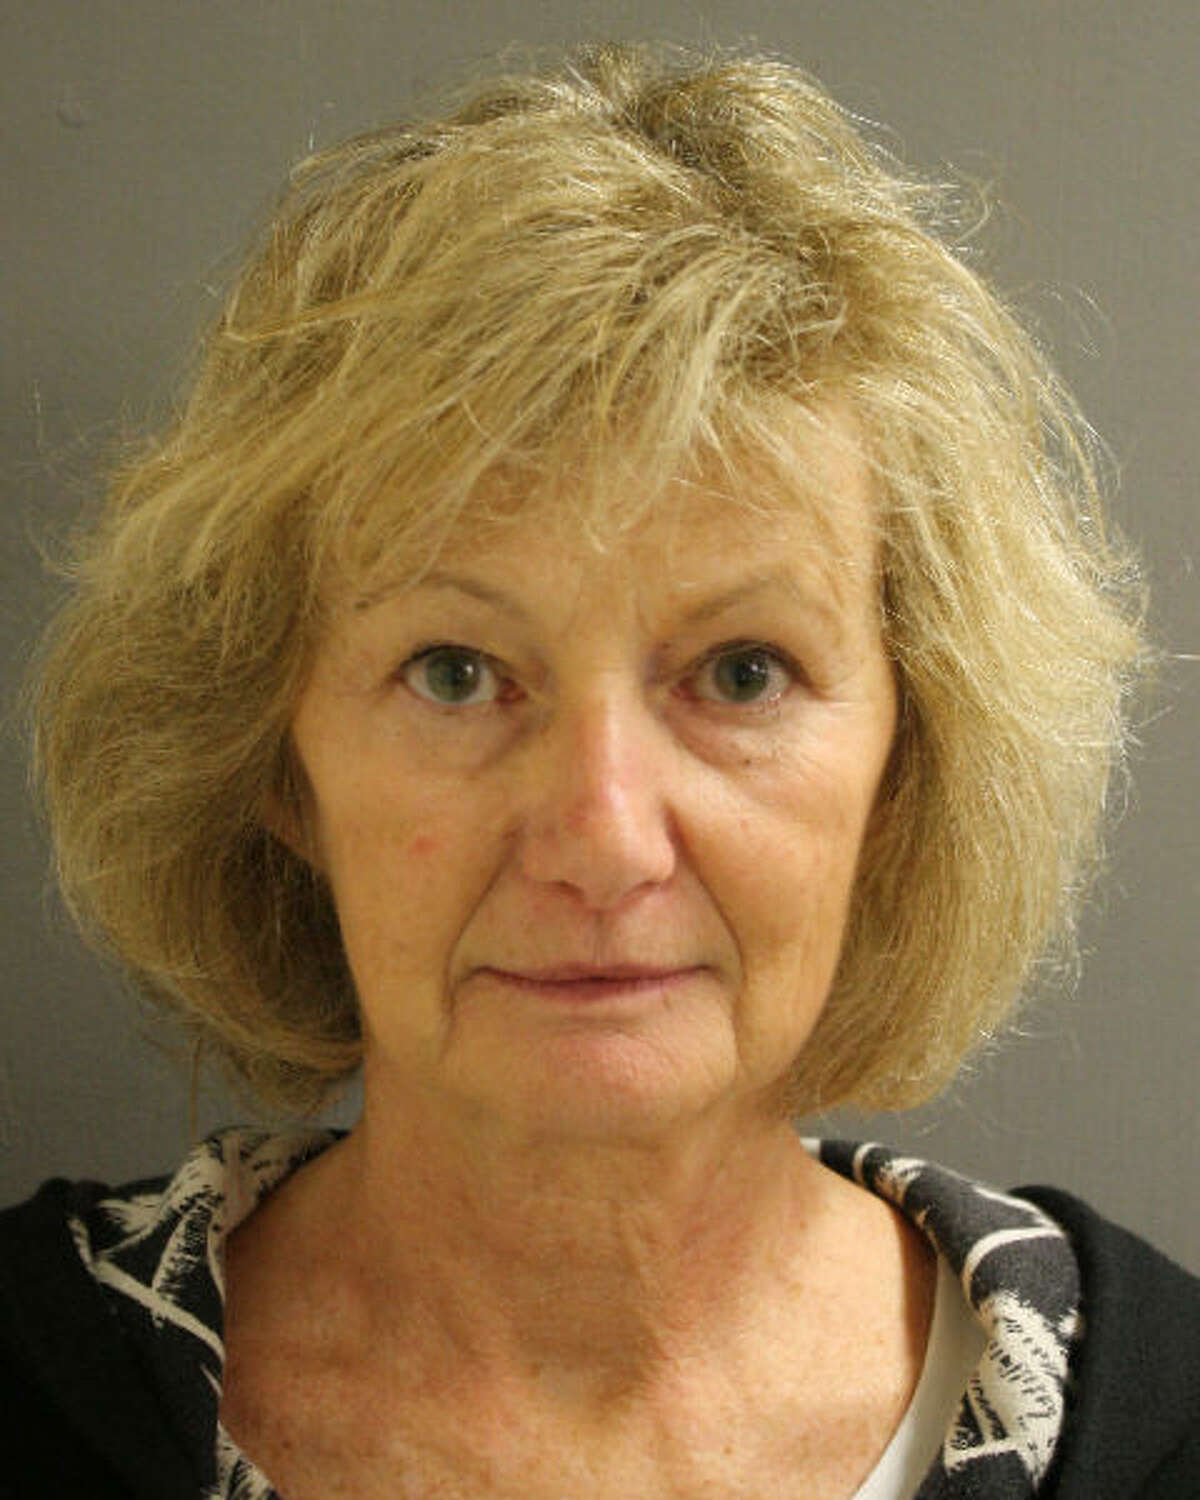 This booking photo released by the Harris County (Texas) Sheriff’s Office shows Elaine Yates. Two sisters who disappeared from Rhode Island with their mother Elaine Yates in 1985 have been located in the Houston area, and their mother was charged with snatching them, police announced Tuesday, Jan. 17, 2017. Yates, who had been living in Houston under the name Leina Waldberg, was arrested on Monday, Jan. 16, without incident and faces arraignment Wednesday in Rhode Island on a fugitive charge. (Harris County Sheriff’s Office via AP)